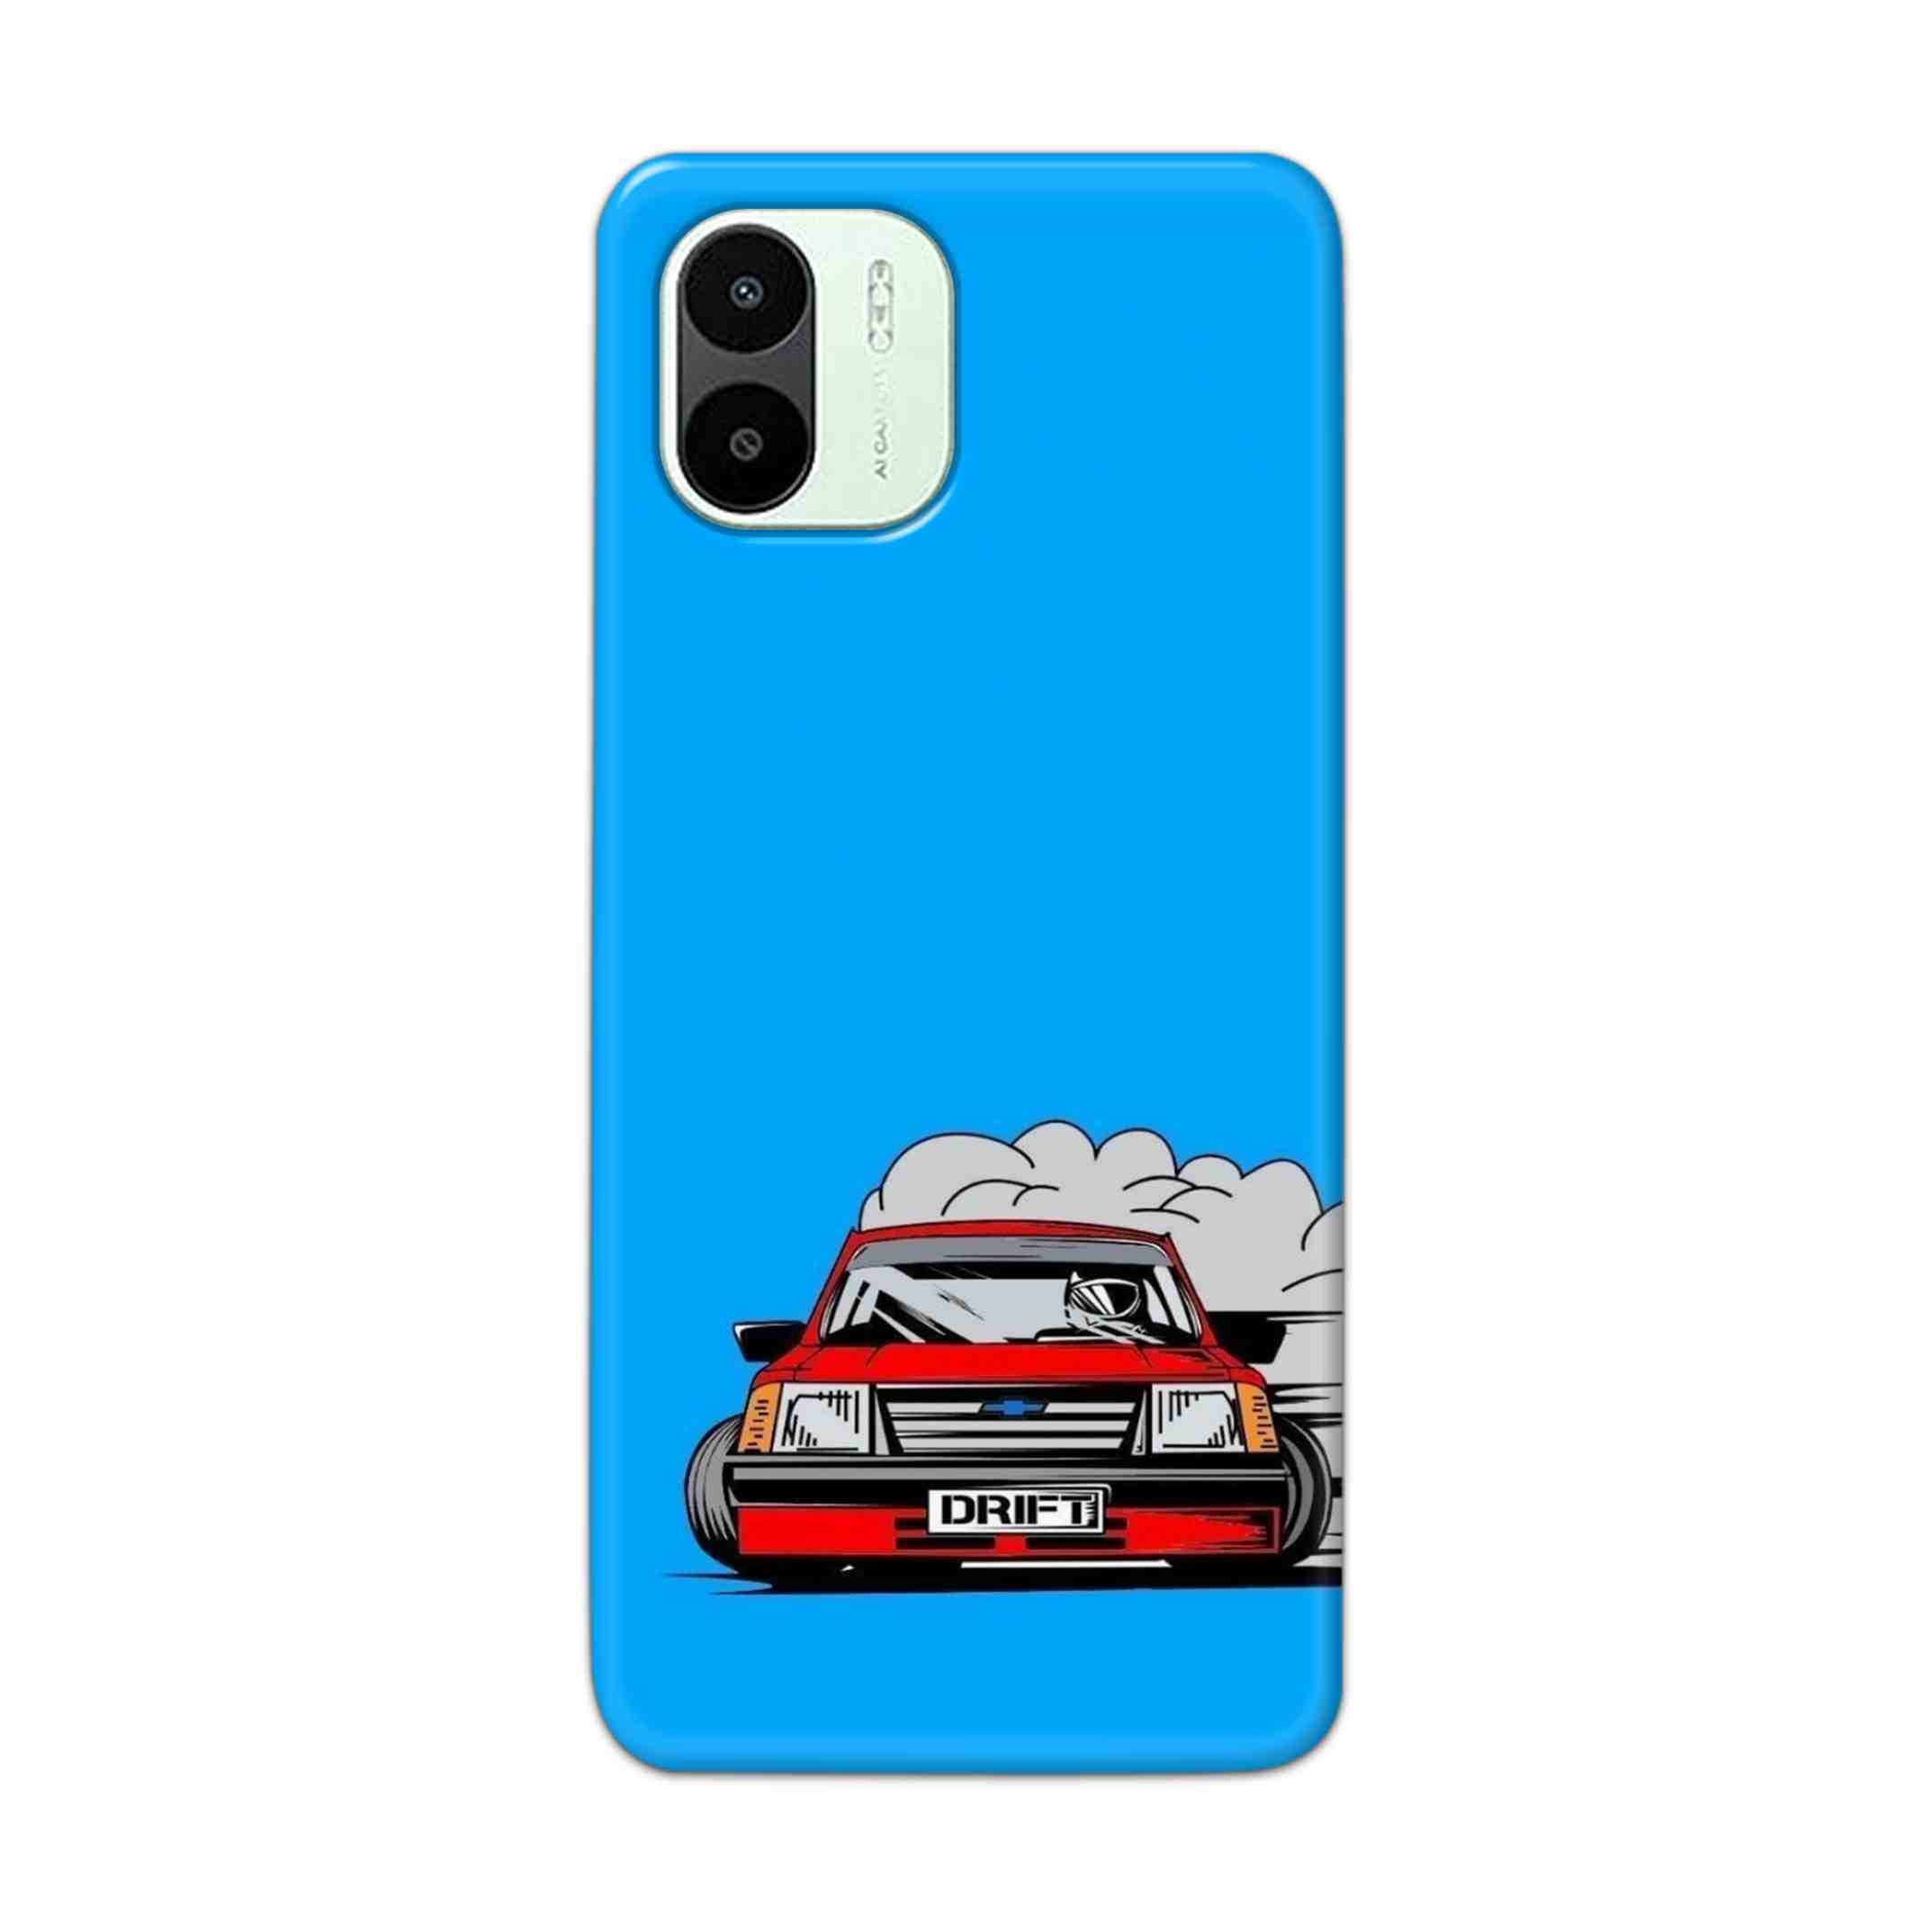 Buy Drift Hard Back Mobile Phone Case Cover For Xiaomi Redmi A1 5G Online